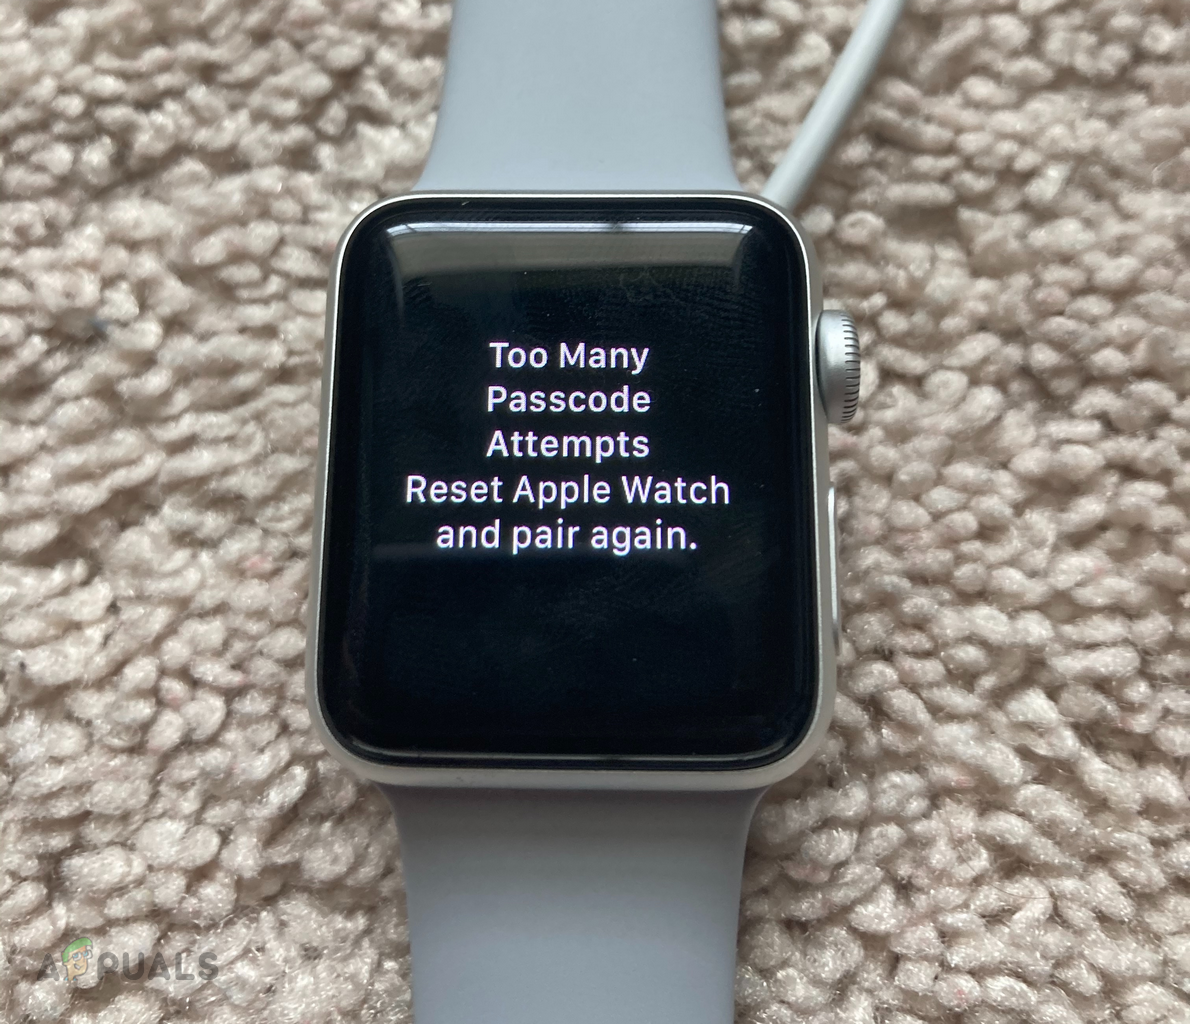 Too Many Passcode Attempts Reset Apple Watch and Pair Again